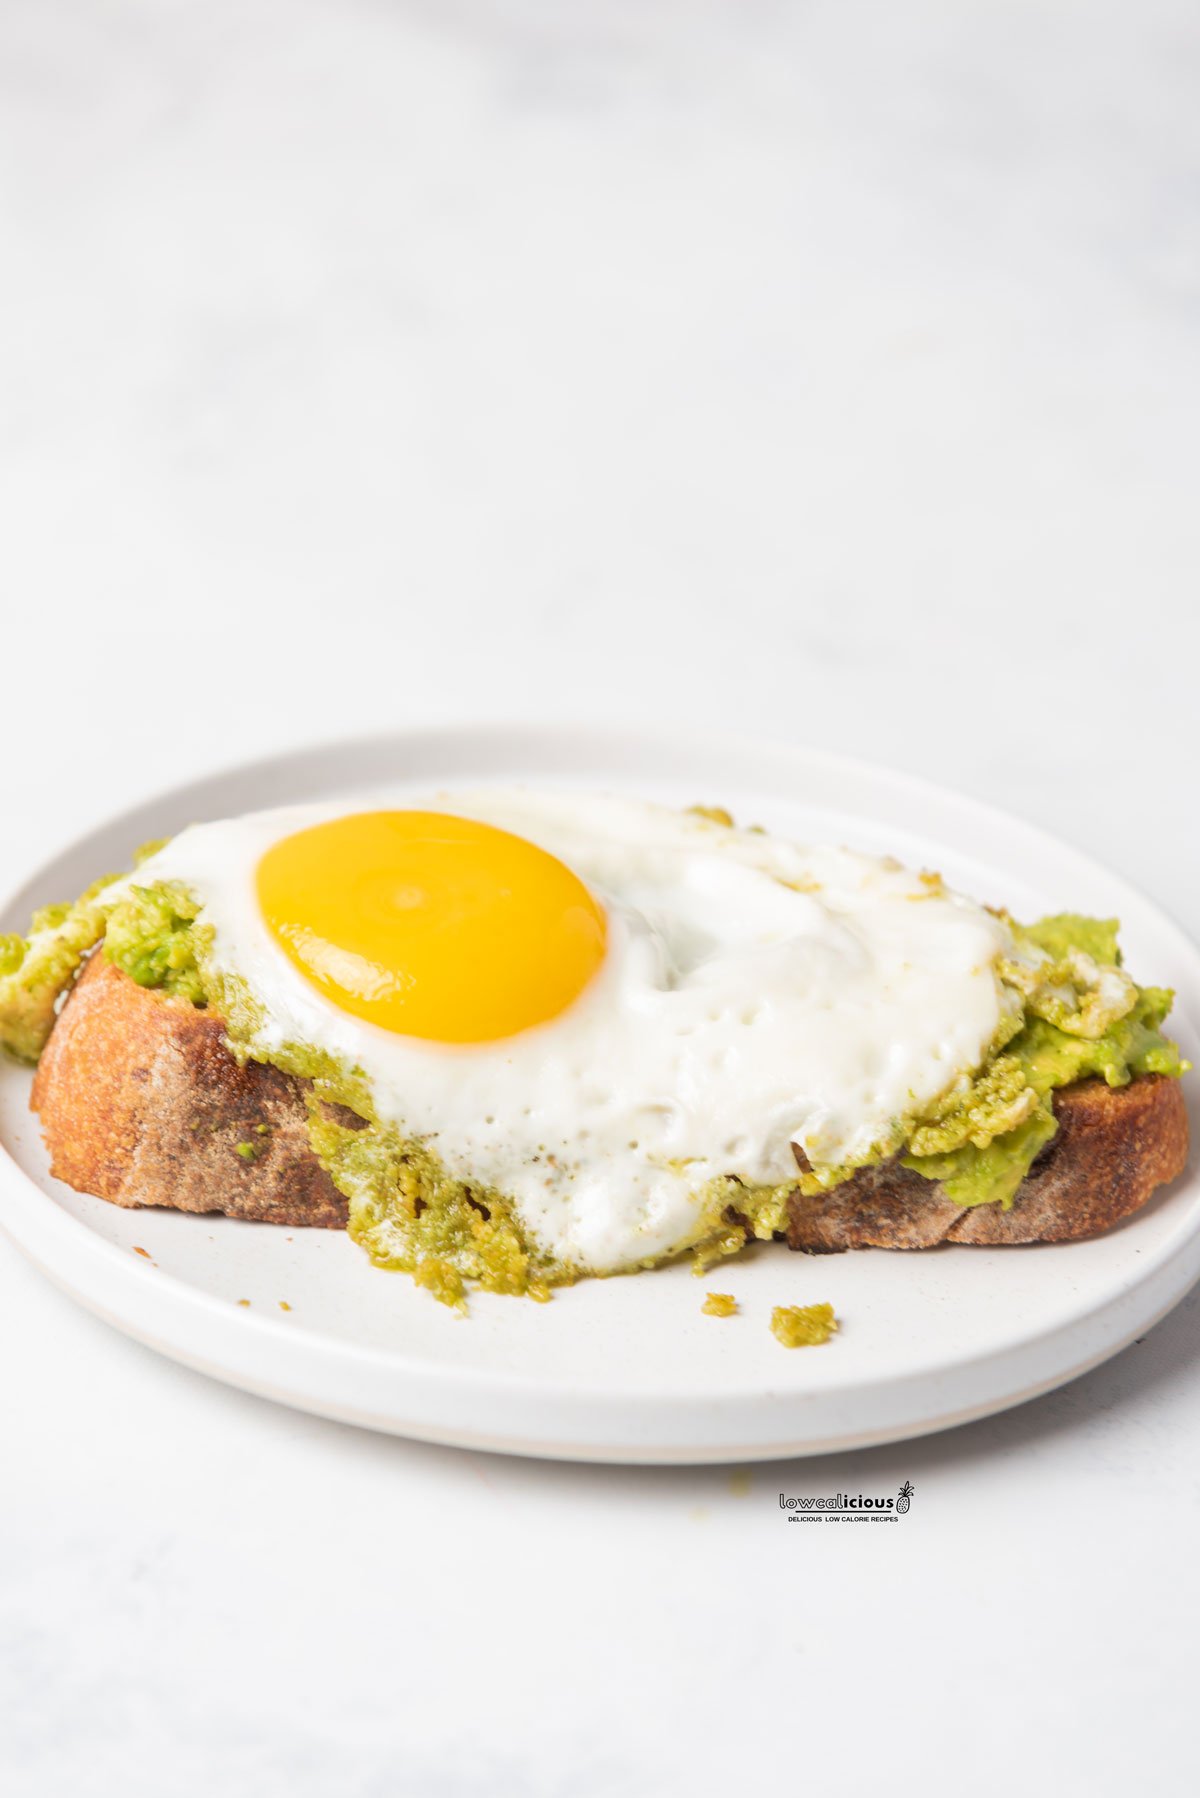 Easy Pesto Eggs (Viral TikTok Recipe) cooked and served on top of smashed avocado on a slice of sourdough bread on a round white plate